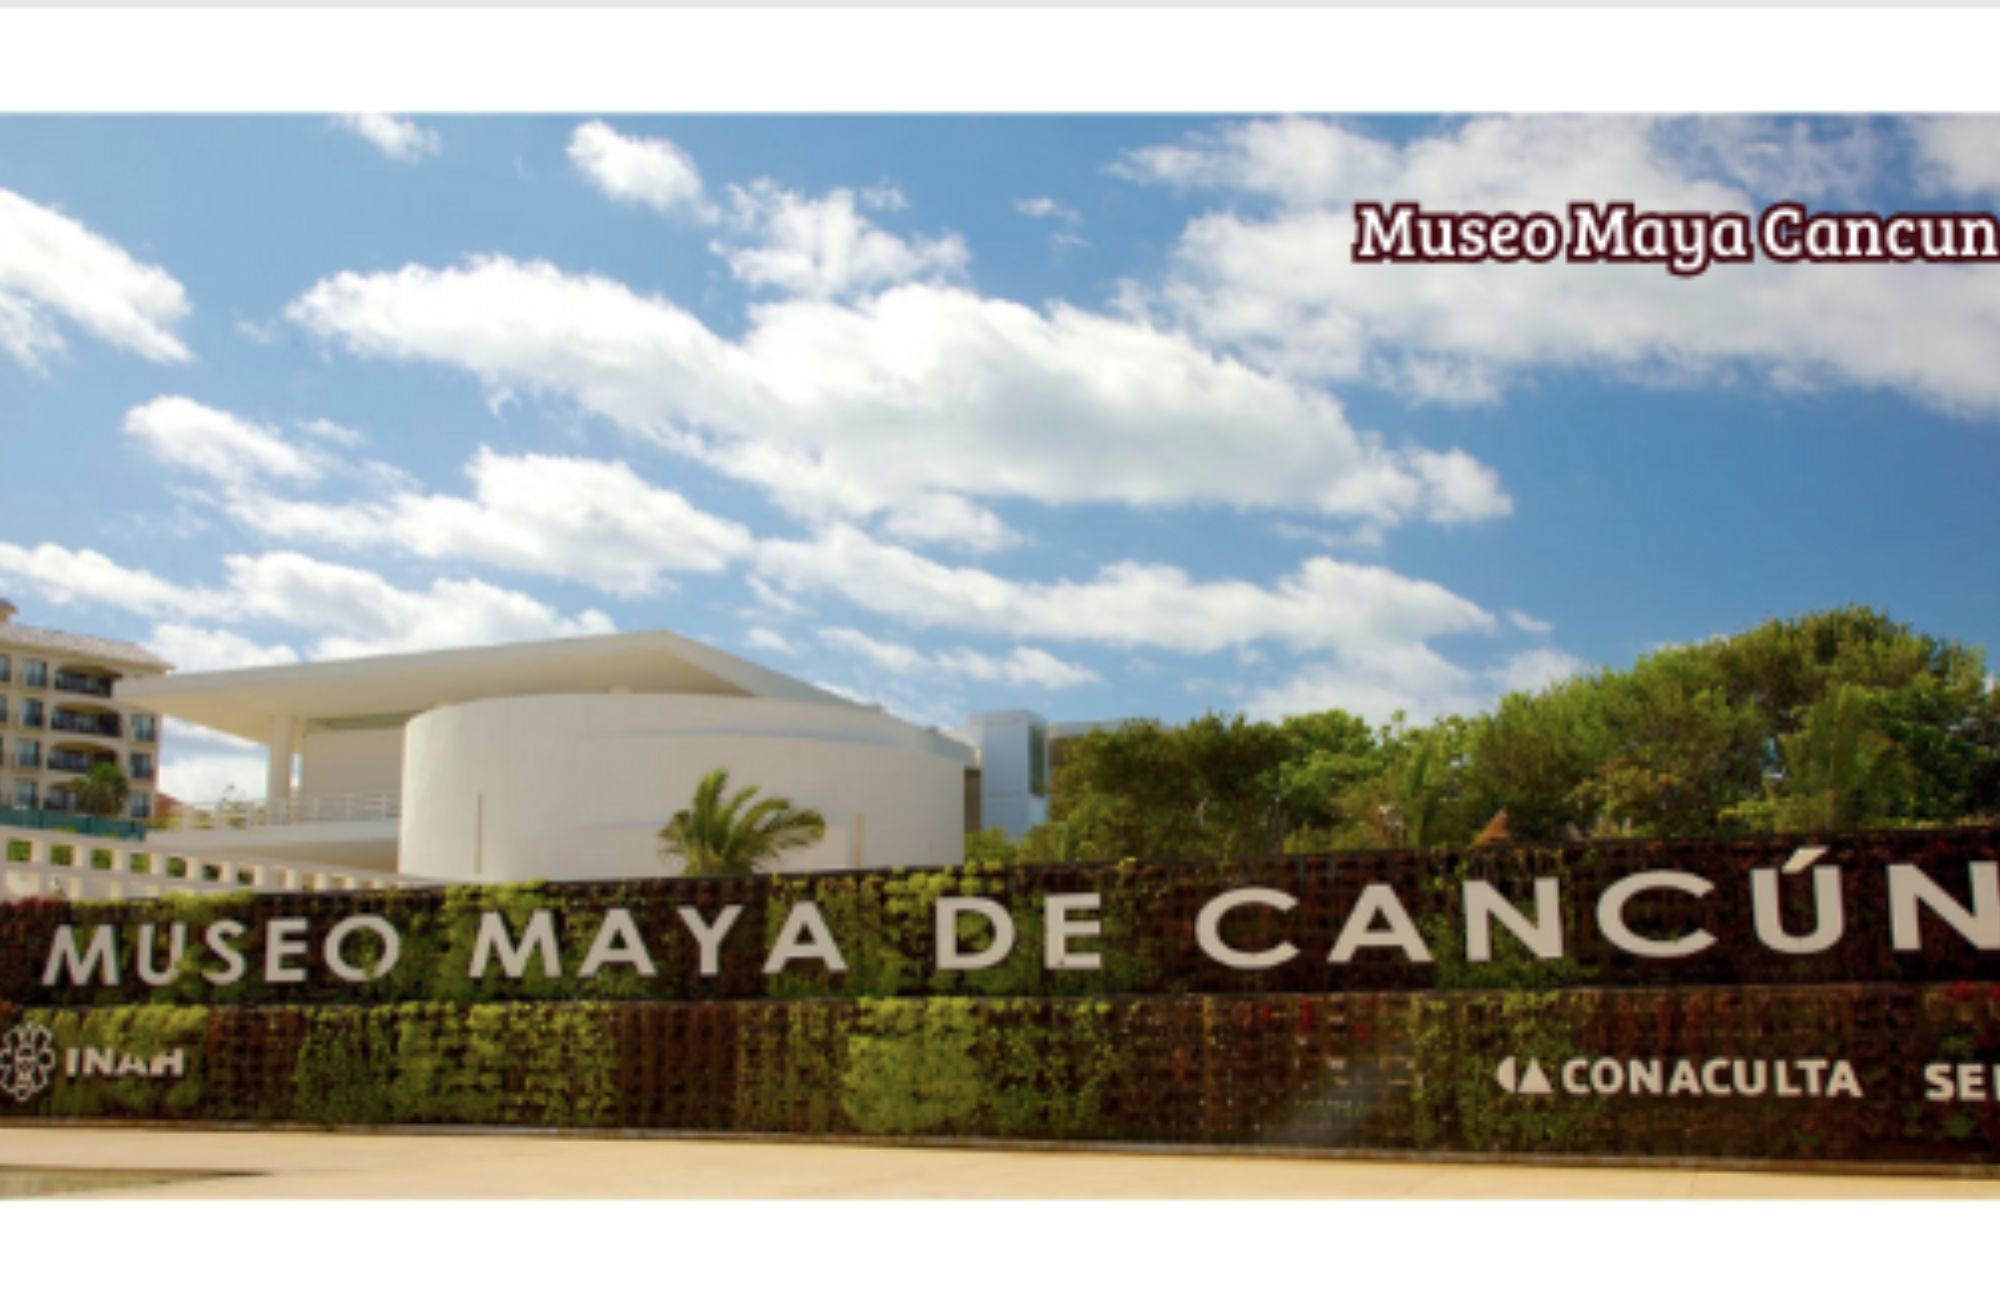 214 m2 spacious condominium, marble floor, in gated community with amenities, with pool, gym, BBQ area, for sale in Cumbres Cancun.